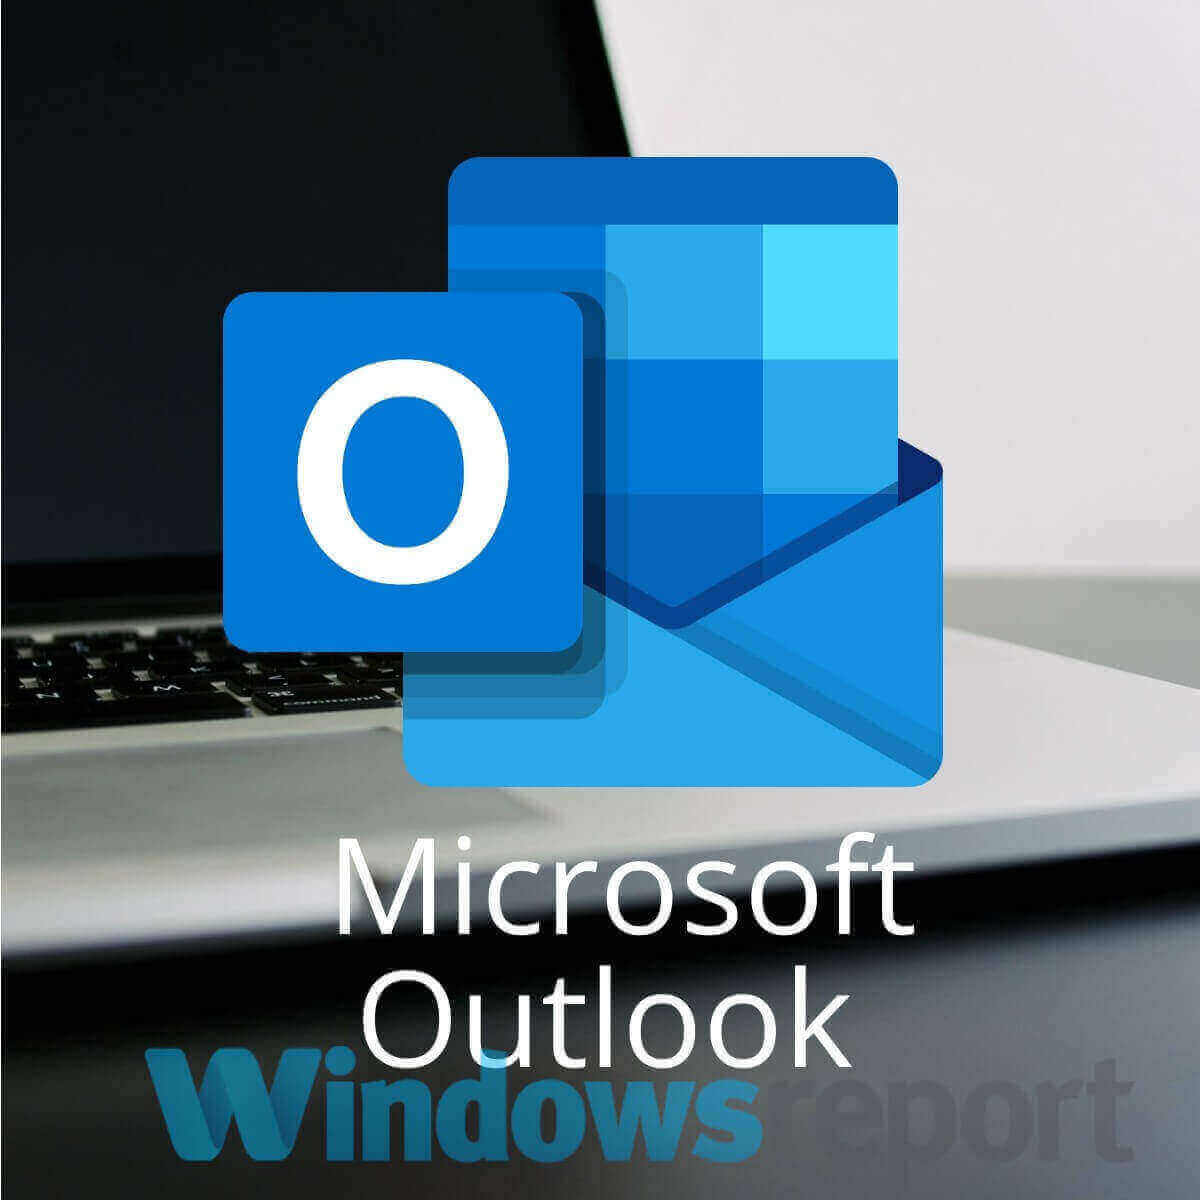 Microsoft Outlook 2016 16.16.5 download free